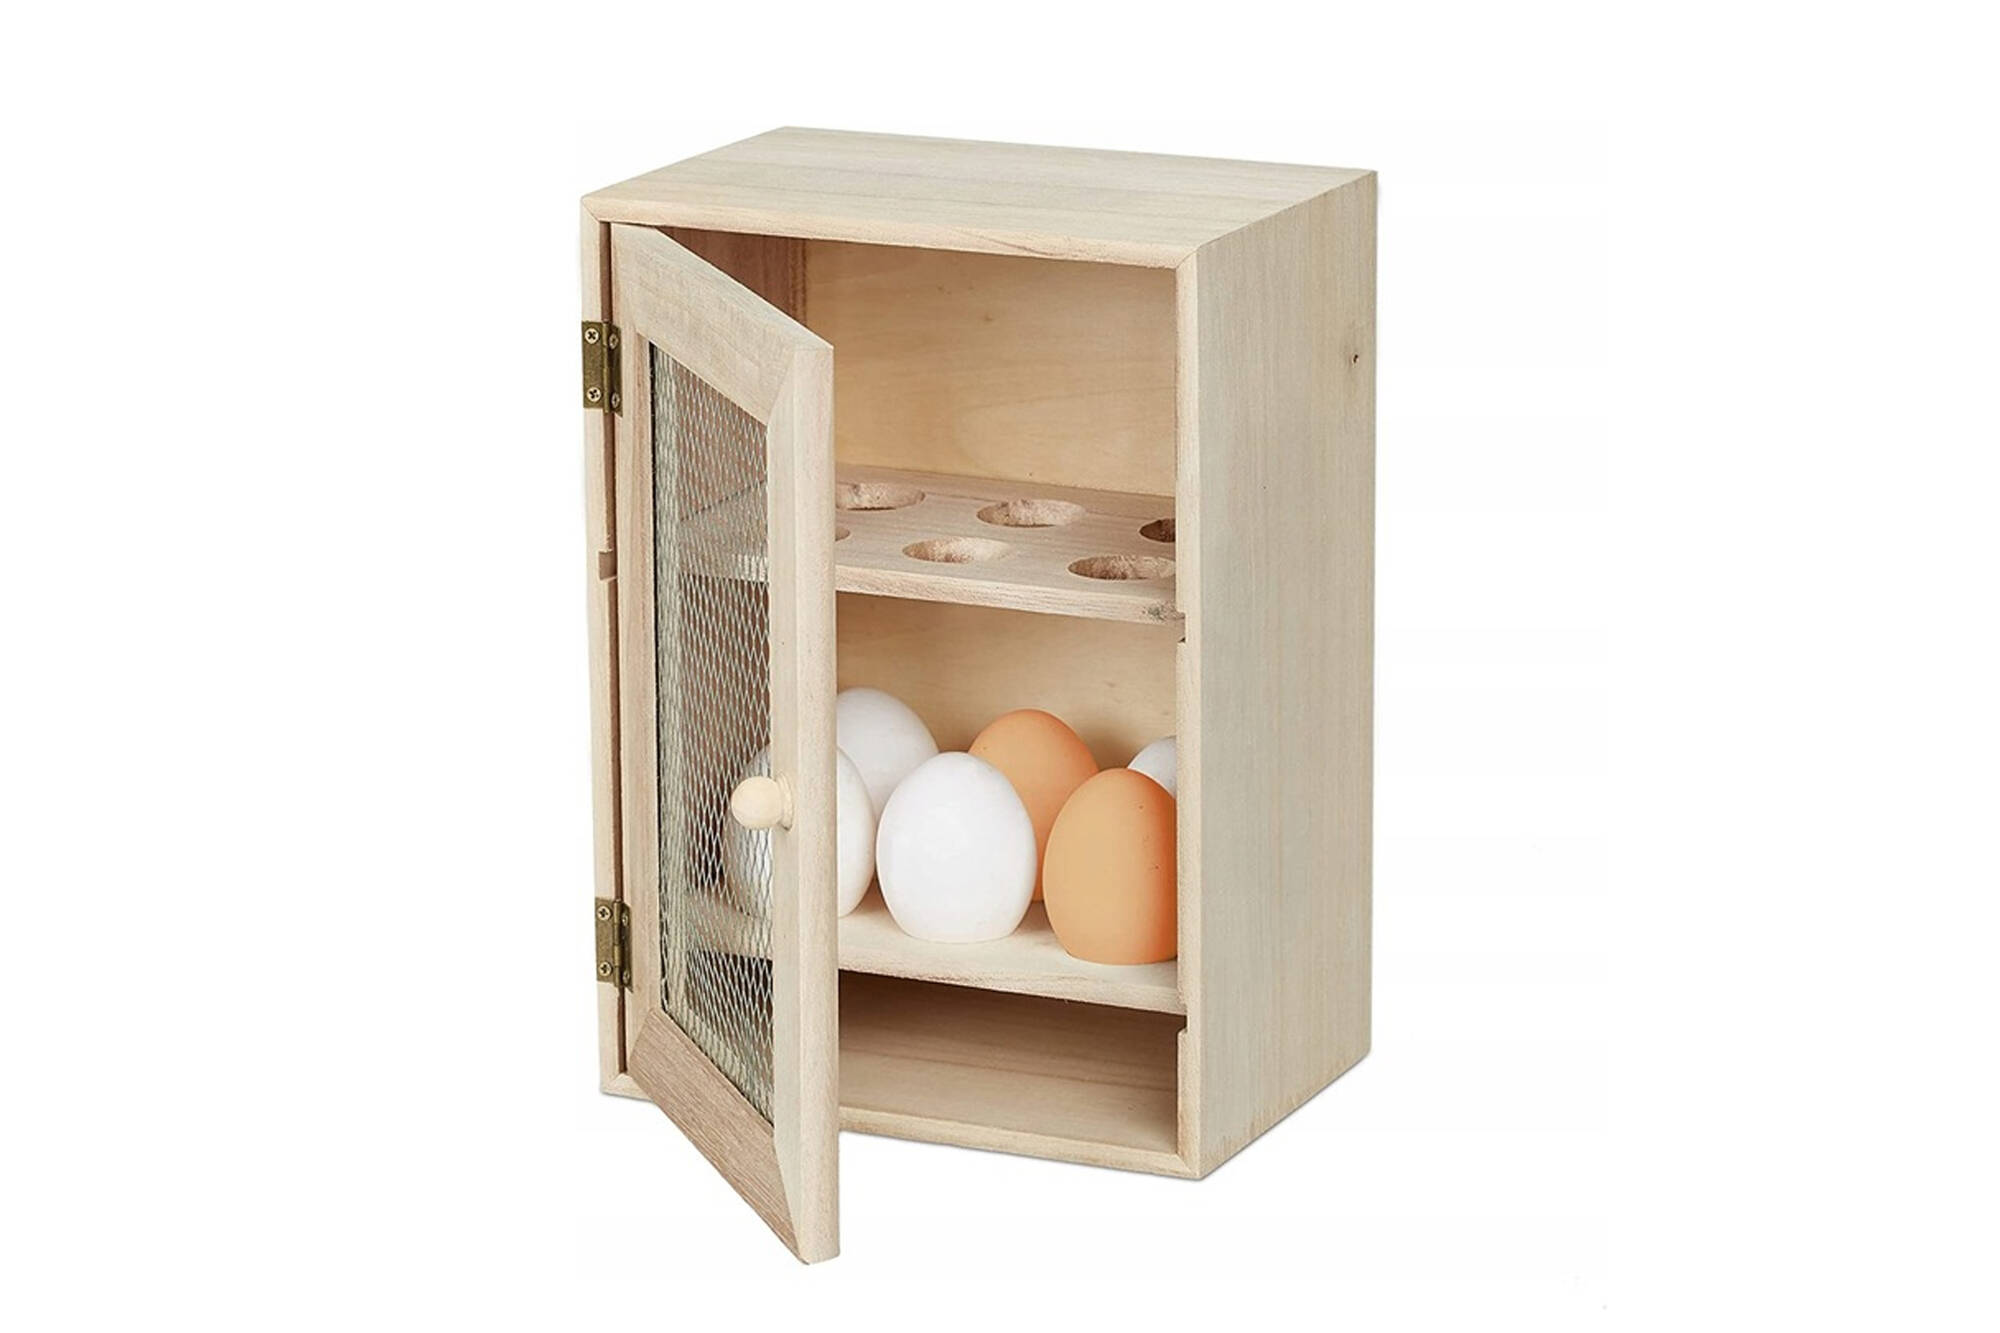 Relaxdays wooden egg container cabinet